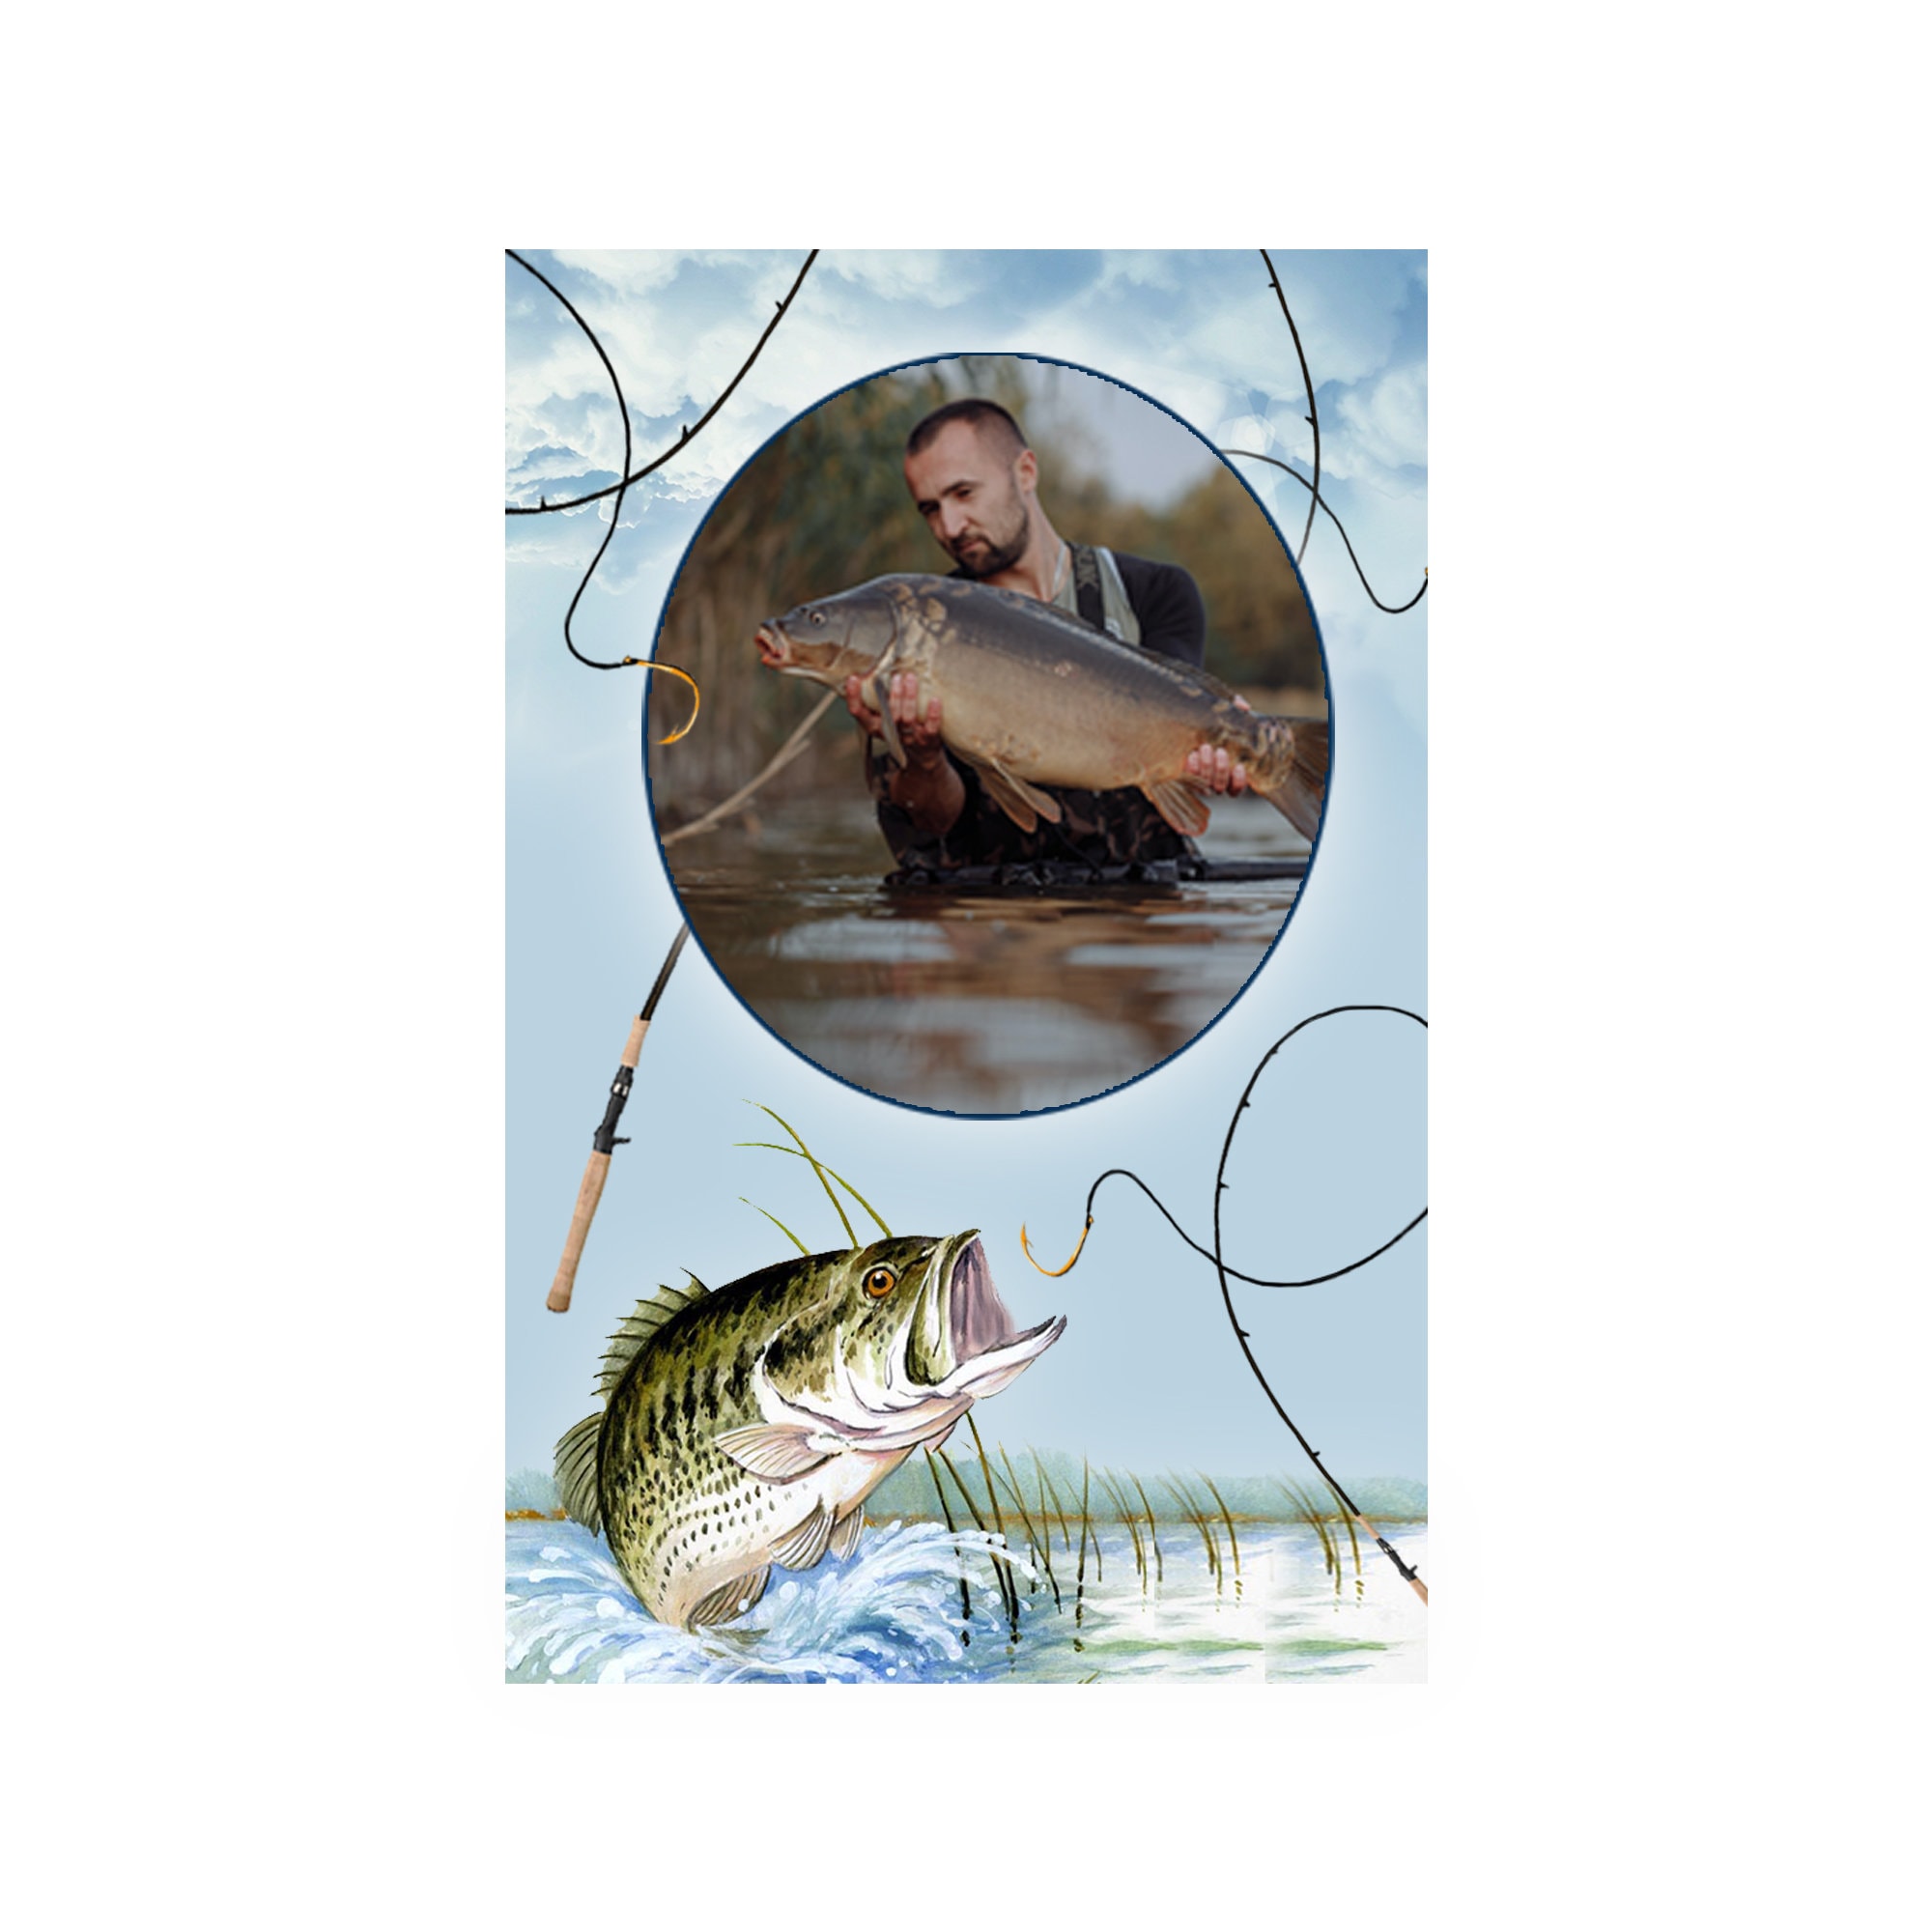 Fishing in Heaven Memorial Cards Funeral Card Sympathy Cards